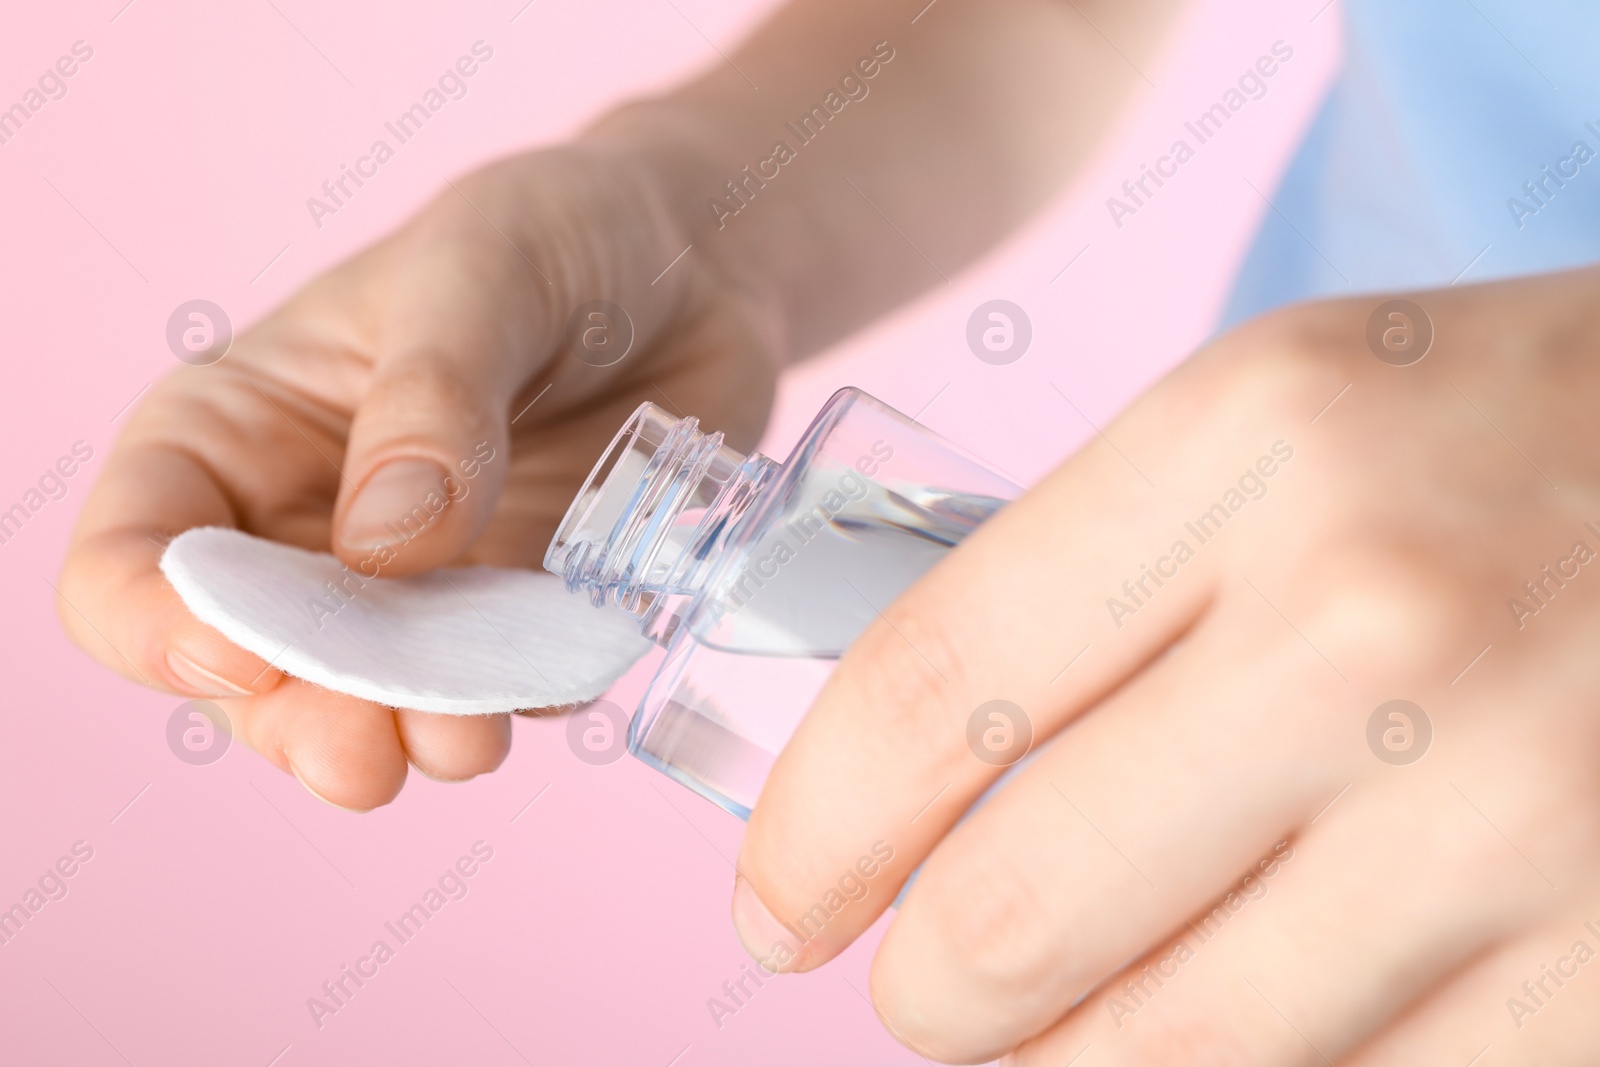 Photo of Woman pouring micellar water from bottle on cotton pad against pink background, closeup